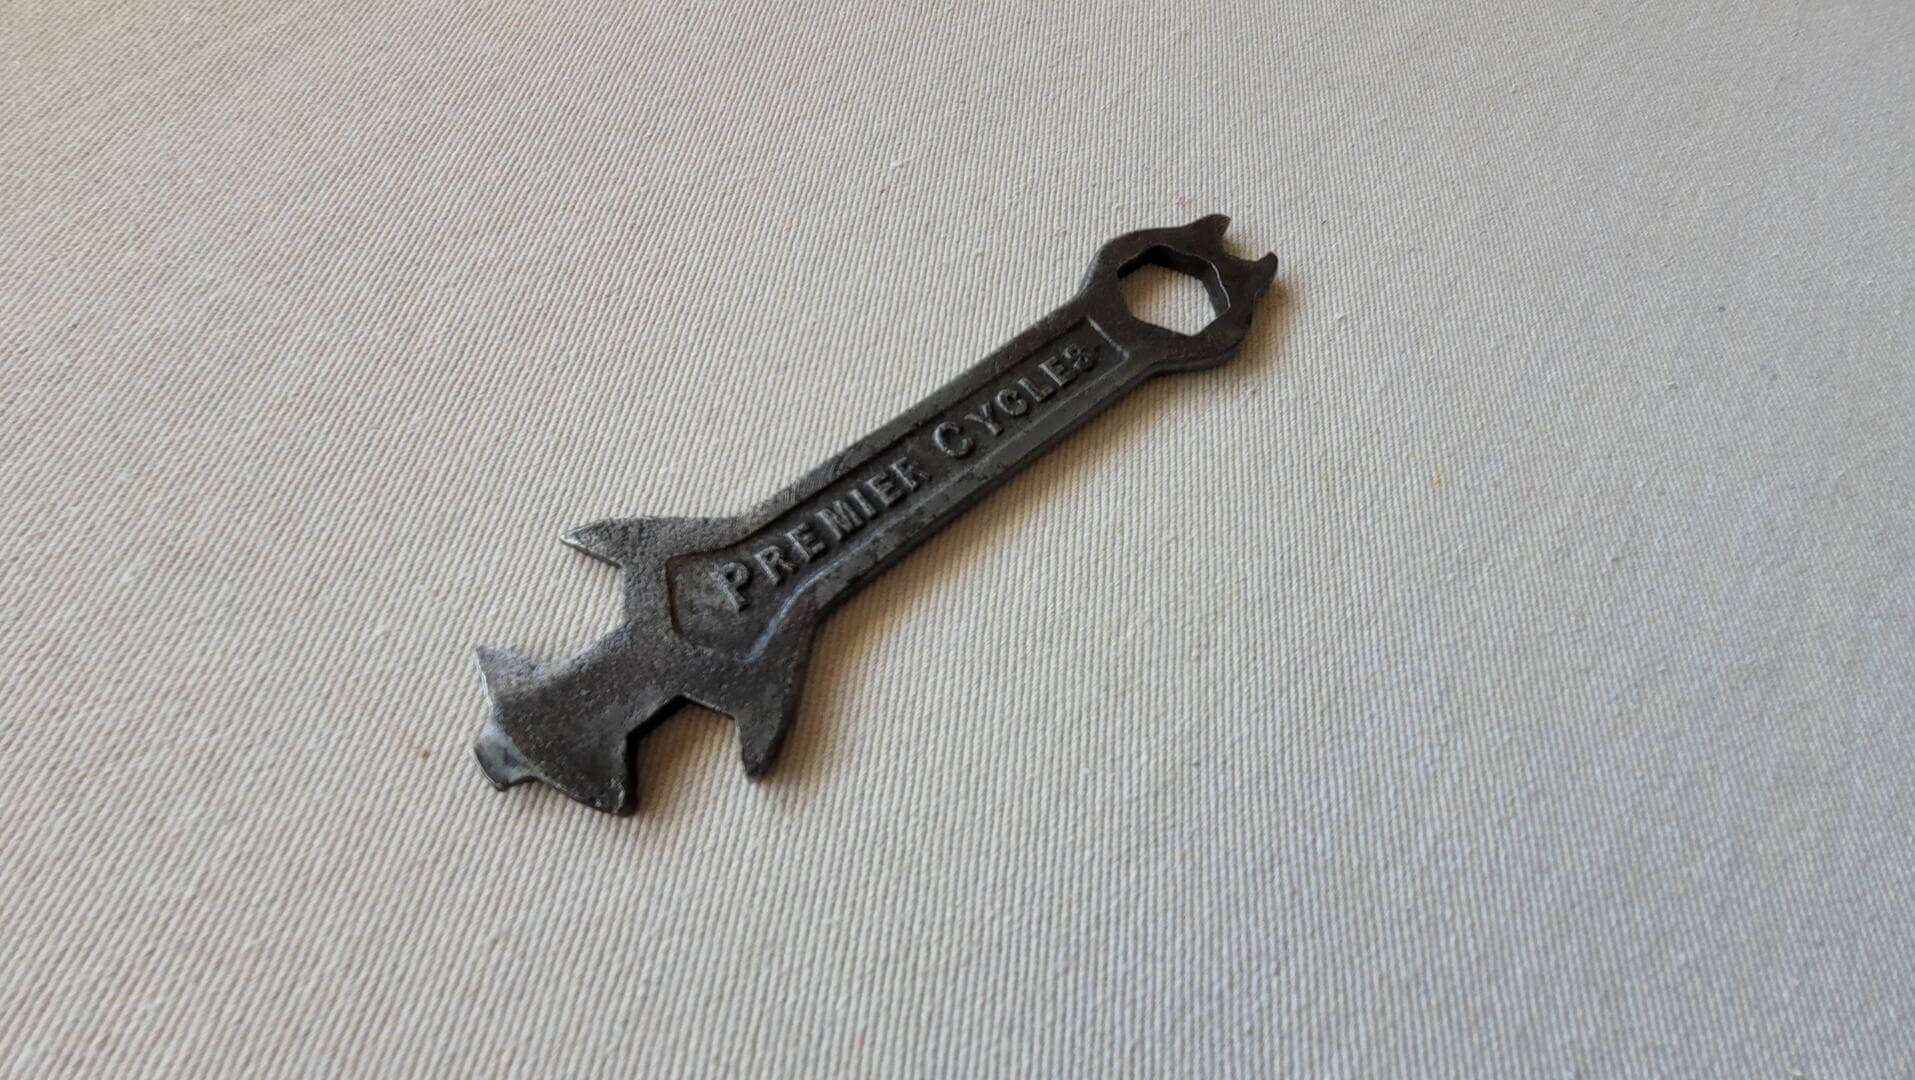 Rare vintage Premier Cycle Co Ltd Coventry original bicycle multi spanner. Antique made in England collectible wrenches and bike tools